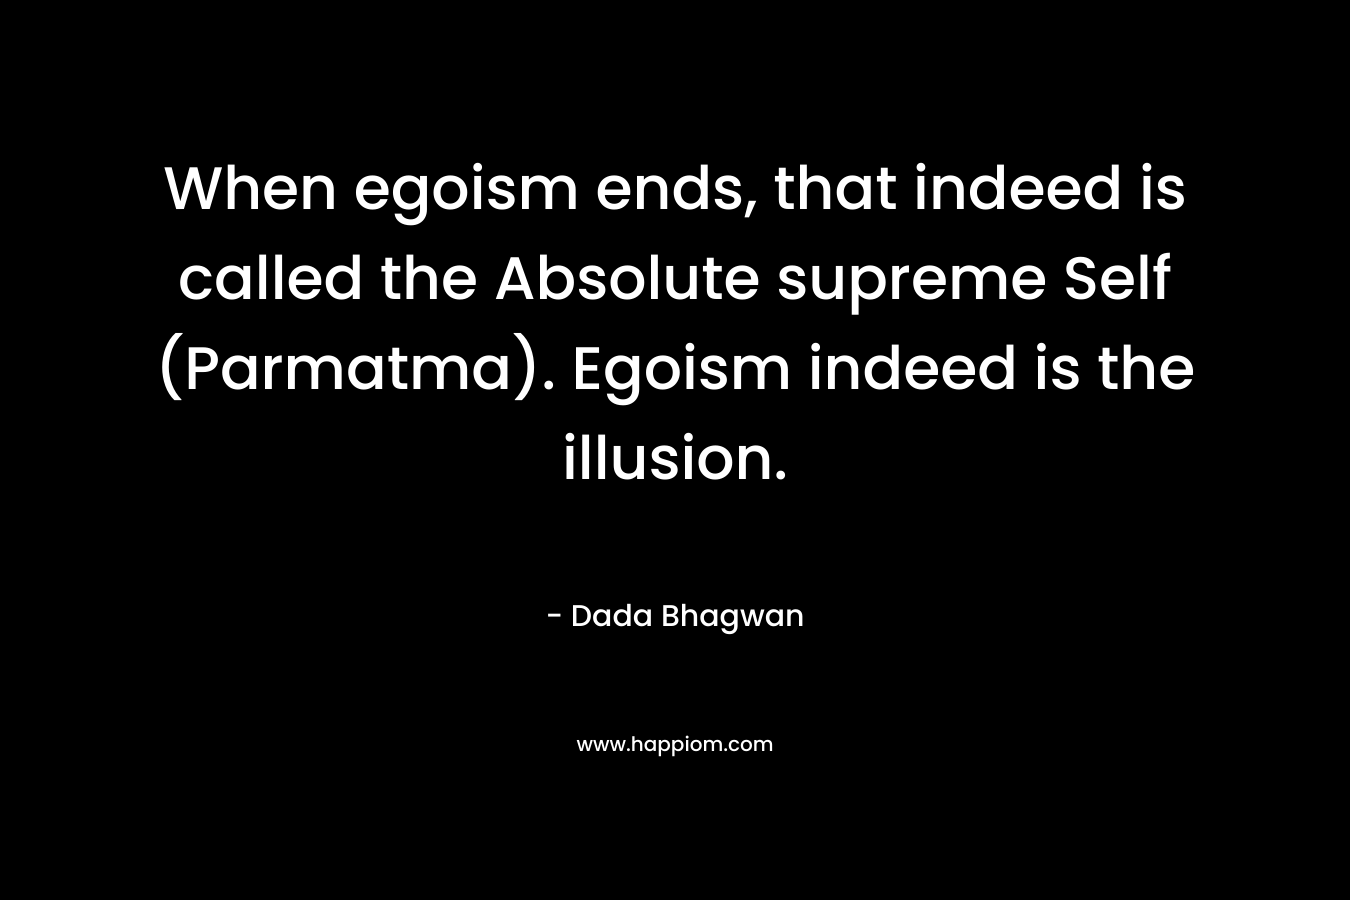 When egoism ends, that indeed is called the Absolute supreme Self (Parmatma). Egoism indeed is the illusion. – Dada Bhagwan